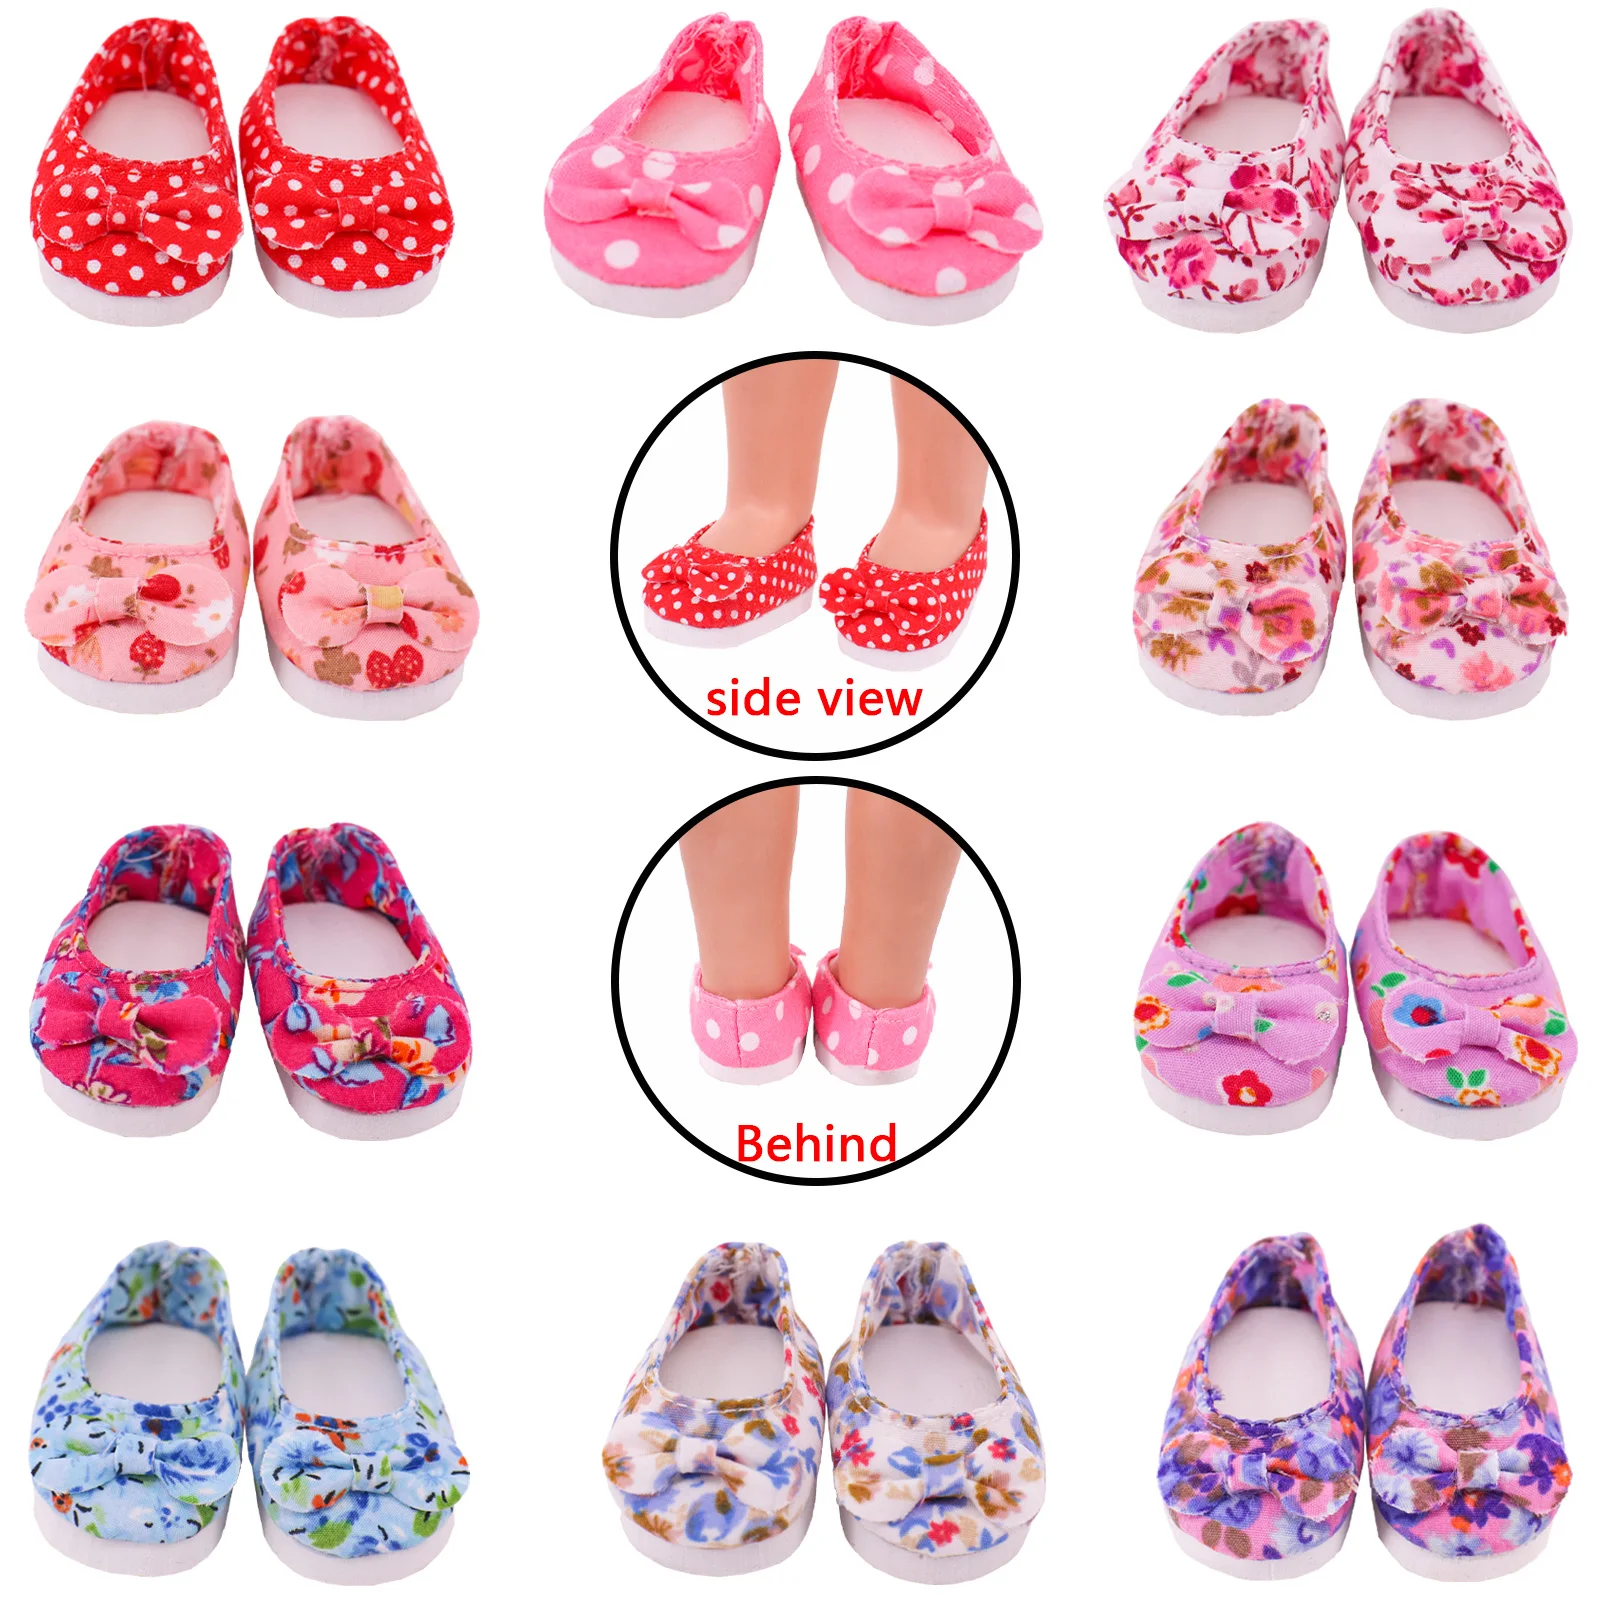 

Doll Shoes Floral Print For 14.5Inch Wellie Wisher 32-34 Cm Paola Reina Dolls Clothes Accessories 20Cm Kpop Doll 1/6 BJD Blyth